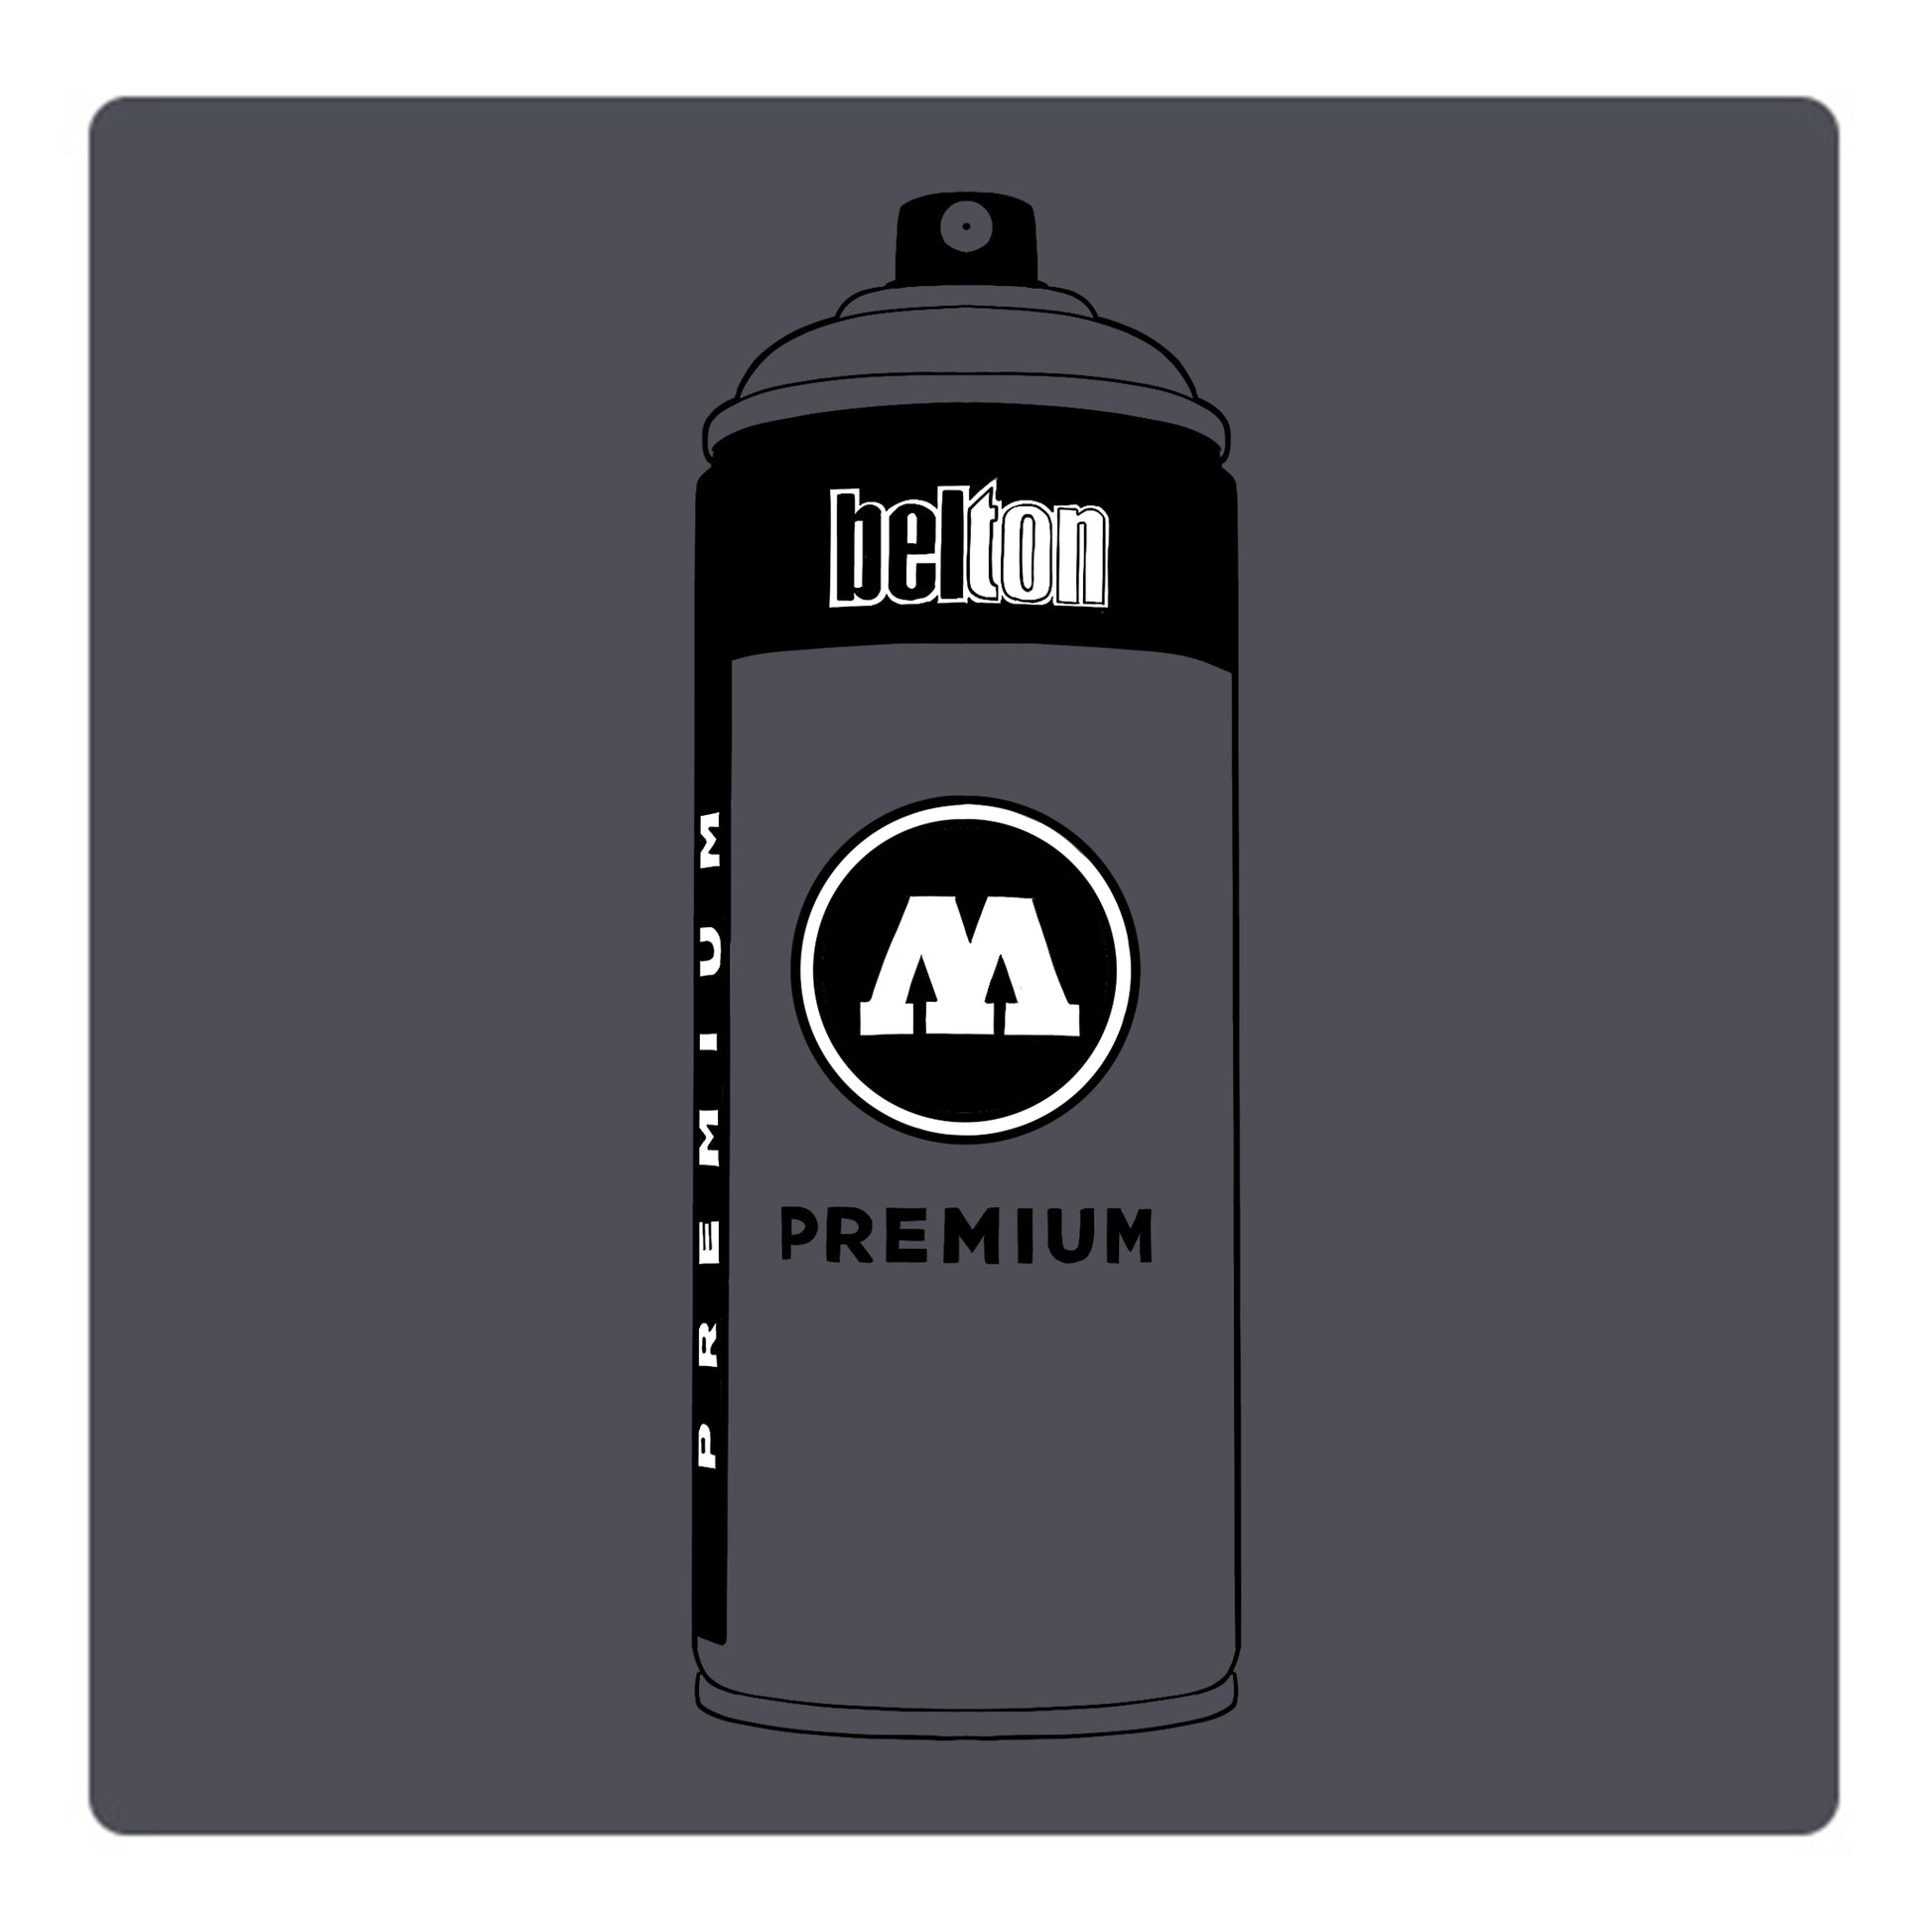 A black outline drawing of a greyish purple spray paint can with the words "belton","premium" and the letter"M" written on the face in black and white font. The background is a color swatch of the same greyish purple with a white border